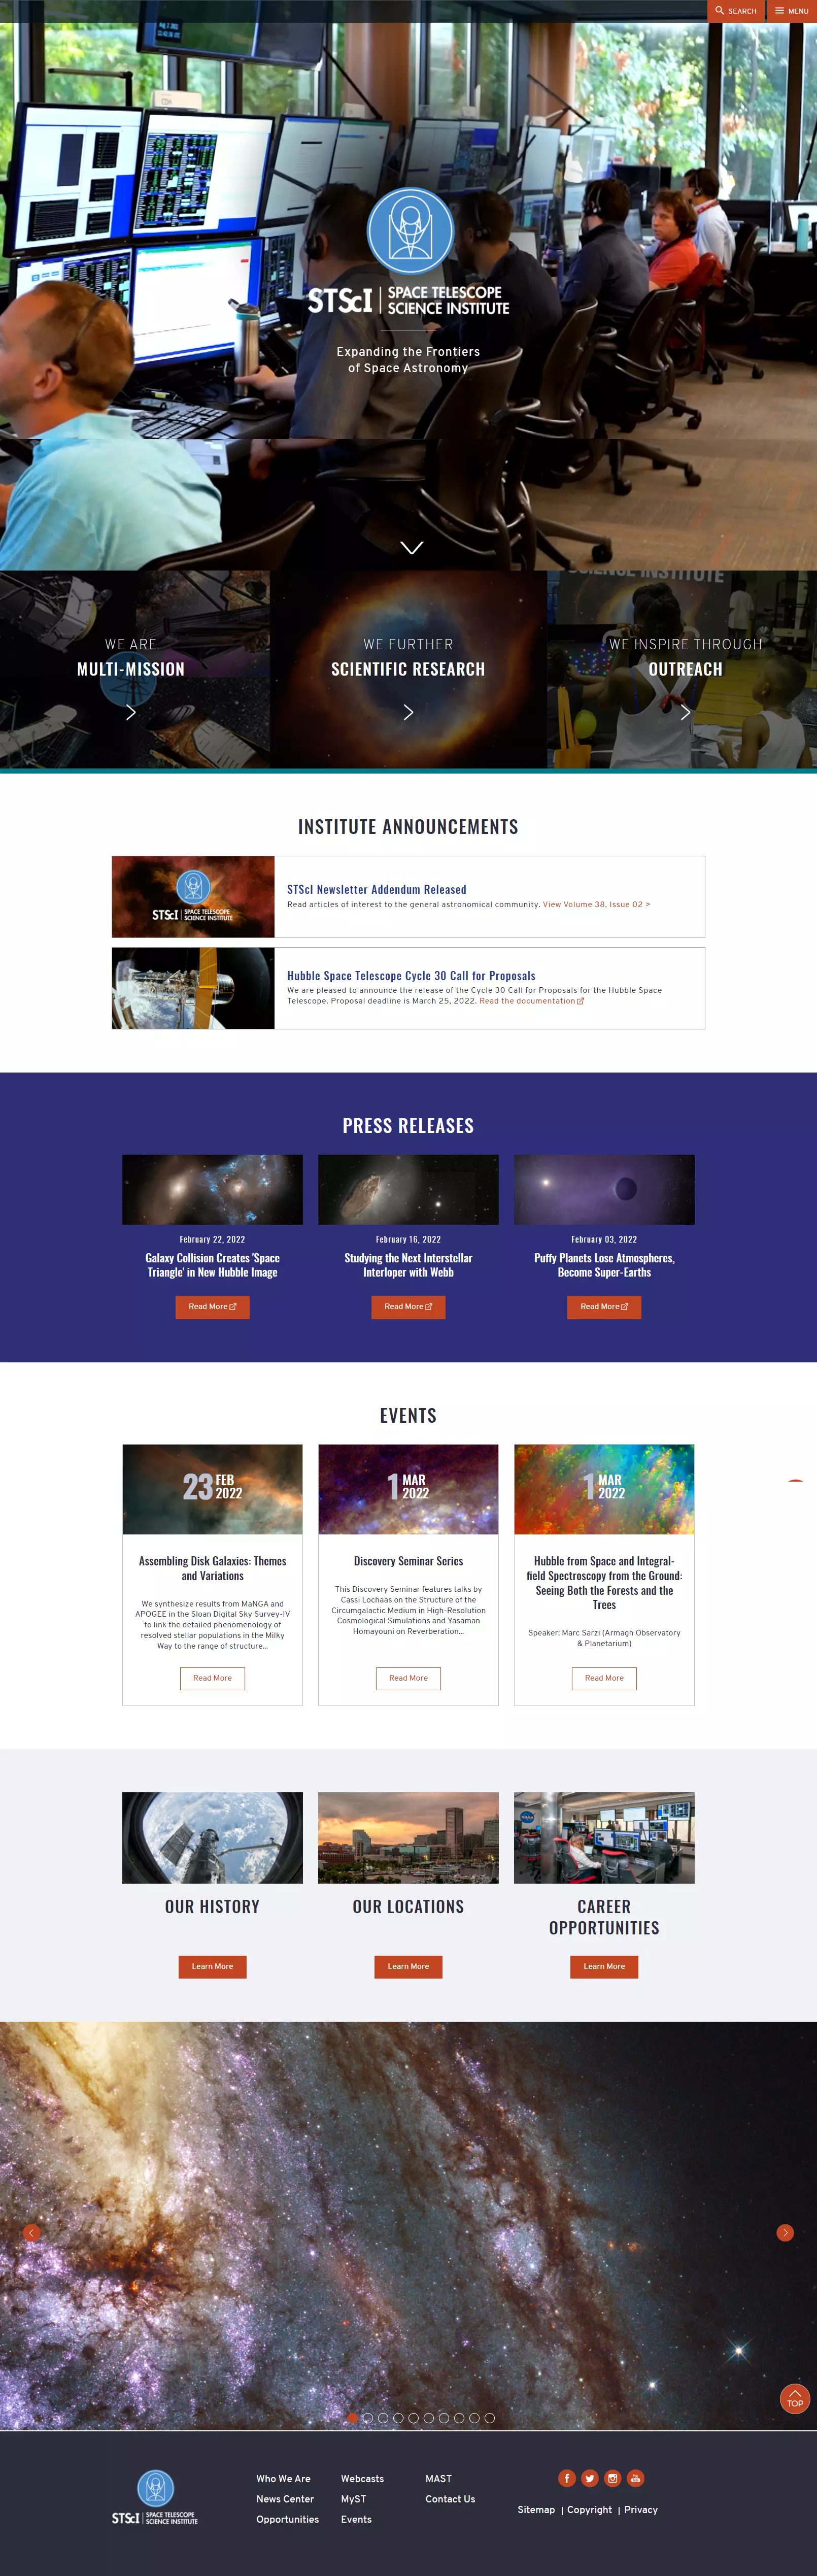 STSCi-Home-Page.png